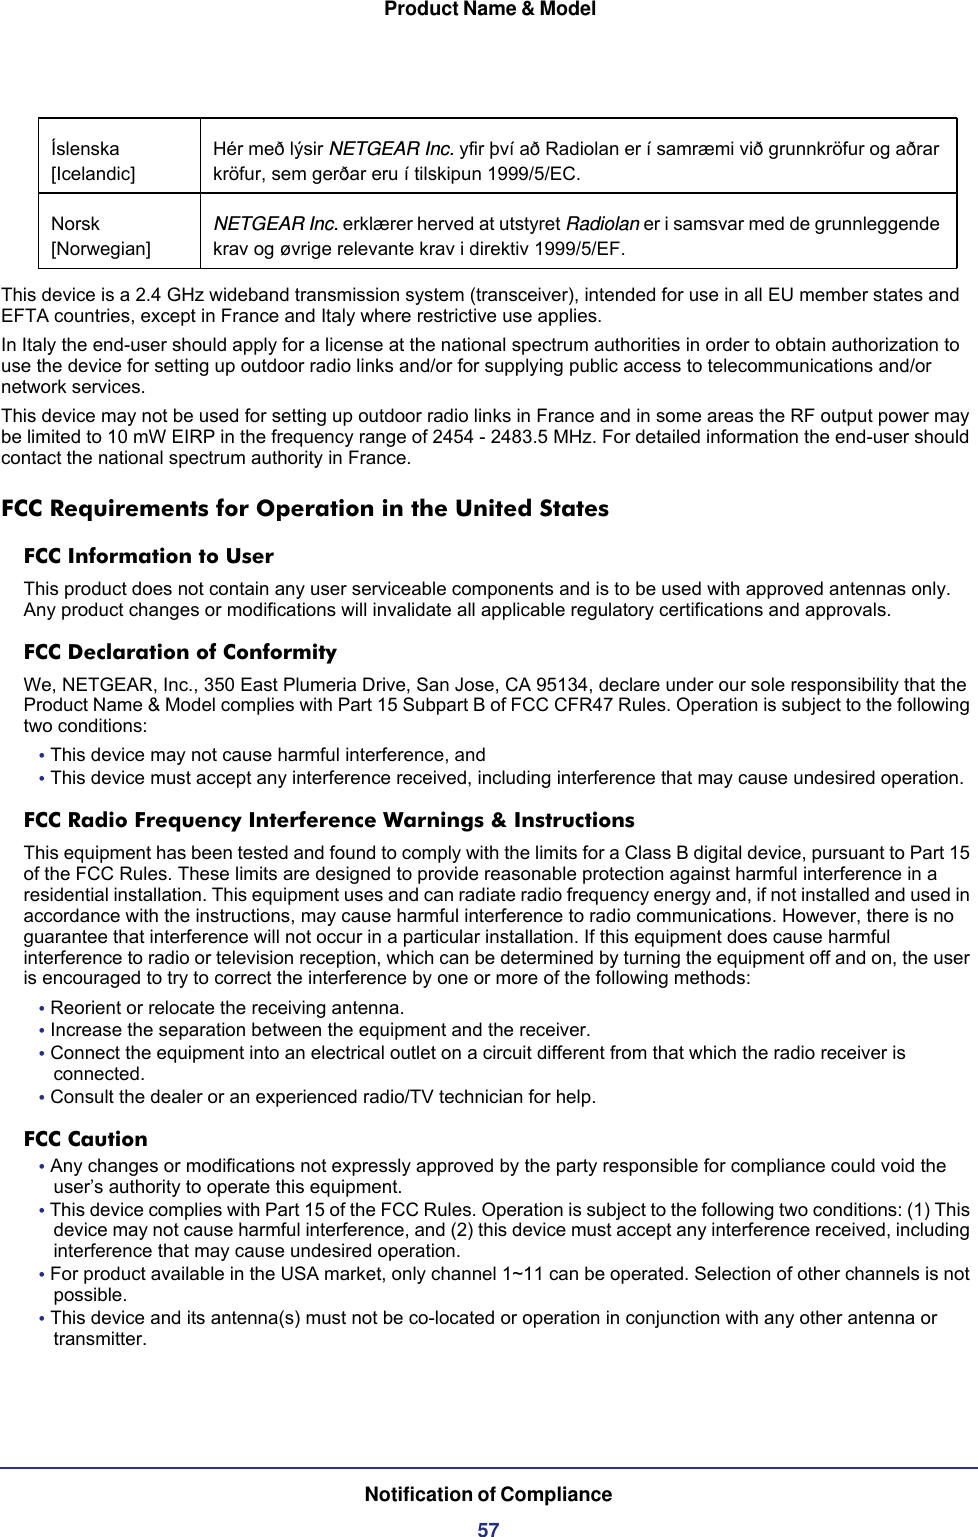  Product Name &amp; ModelNotification of Compliance57This device is a 2.4 GHz wideband transmission system (transceiver), intended for use in all EU member states and EFTA countries, except in France and Italy where restrictive use applies.In Italy the end-user should apply for a license at the national spectrum authorities in order to obtain authorization to use the device for setting up outdoor radio links and/or for supplying public access to telecommunications and/or network services.This device may not be used for setting up outdoor radio links in France and in some areas the RF output power may be limited to 10 mW EIRP in the frequency range of 2454 - 2483.5 MHz. For detailed information the end-user should contact the national spectrum authority in France.FCC Requirements for Operation in the United States FCC Information to UserThis product does not contain any user serviceable components and is to be used with approved antennas only. Any product changes or modifications will invalidate all applicable regulatory certifications and approvals.FCC Declaration of ConformityWe, NETGEAR, Inc., 350 East Plumeria Drive, San Jose, CA 95134, declare under our sole responsibility that the Product Name &amp; Model complies with Part 15 Subpart B of FCC CFR47 Rules. Operation is subject to the following two conditions:• This device may not cause harmful interference, and• This device must accept any interference received, including interference that may cause undesired operation.FCC Radio Frequency Interference Warnings &amp; InstructionsThis equipment has been tested and found to comply with the limits for a Class B digital device, pursuant to Part 15 of the FCC Rules. These limits are designed to provide reasonable protection against harmful interference in a residential installation. This equipment uses and can radiate radio frequency energy and, if not installed and used in accordance with the instructions, may cause harmful interference to radio communications. However, there is no guarantee that interference will not occur in a particular installation. If this equipment does cause harmful interference to radio or television reception, which can be determined by turning the equipment off and on, the user is encouraged to try to correct the interference by one or more of the following methods:• Reorient or relocate the receiving antenna.• Increase the separation between the equipment and the receiver.• Connect the equipment into an electrical outlet on a circuit different from that which the radio receiver is connected.• Consult the dealer or an experienced radio/TV technician for help.FCC Caution• Any changes or modifications not expressly approved by the party responsible for compliance could void the user’s authority to operate this equipment. • This device complies with Part 15 of the FCC Rules. Operation is subject to the following two conditions: (1) This device may not cause harmful interference, and (2) this device must accept any interference received, including interference that may cause undesired operation. • For product available in the USA market, only channel 1~11 can be operated. Selection of other channels is not possible.• This device and its antenna(s) must not be co-located or operation in conjunction with any other antenna or transmitter.Íslenska [Icelandic]Hér með lýsir NETGEAR Inc. yfir því að Radiolan er í samræmi við grunnkröfur og aðrar kröfur, sem gerðar eru í tilskipun 1999/5/EC.Norsk [Norwegian]NETGEAR Inc. erklærer herved at utstyret Radiolan er i samsvar med de grunnleggende krav og øvrige relevante krav i direktiv 1999/5/EF.